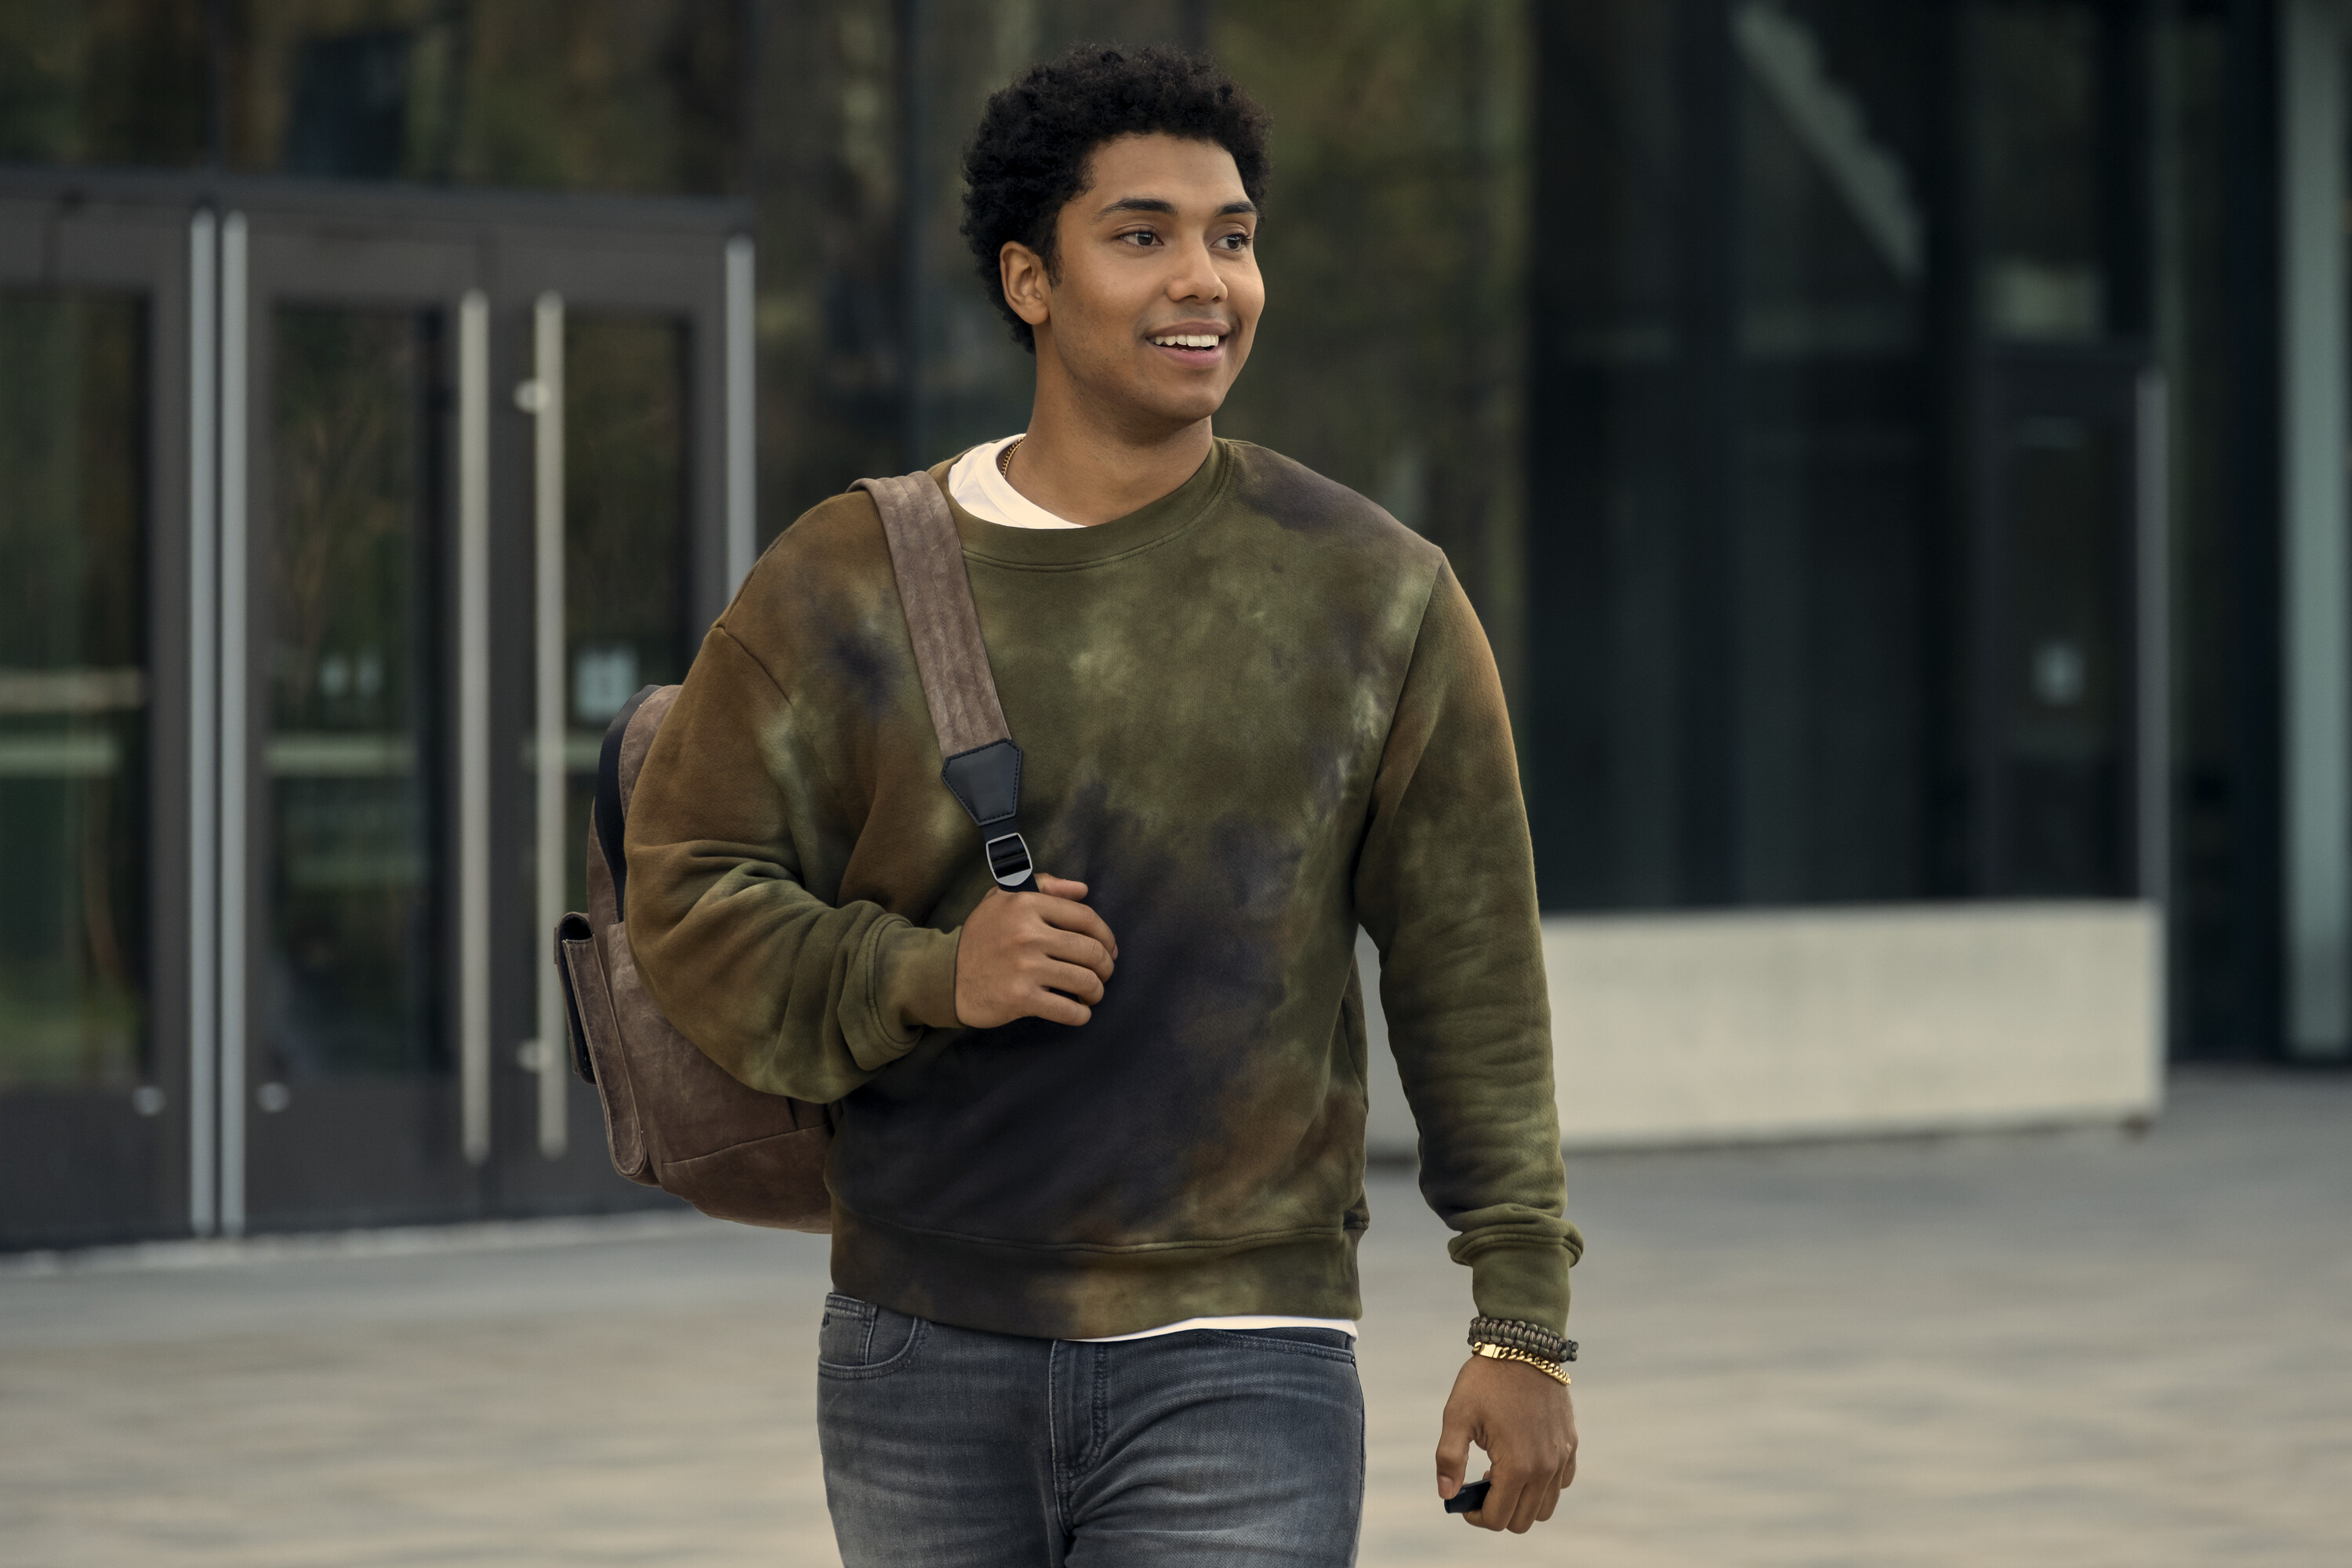 Godolkin student Andre (Chance Perdomo) cheerily walks out of a building with a bag hanging off his shoulder, unaware of the horrors that await him in the Prime Video series Gen V.